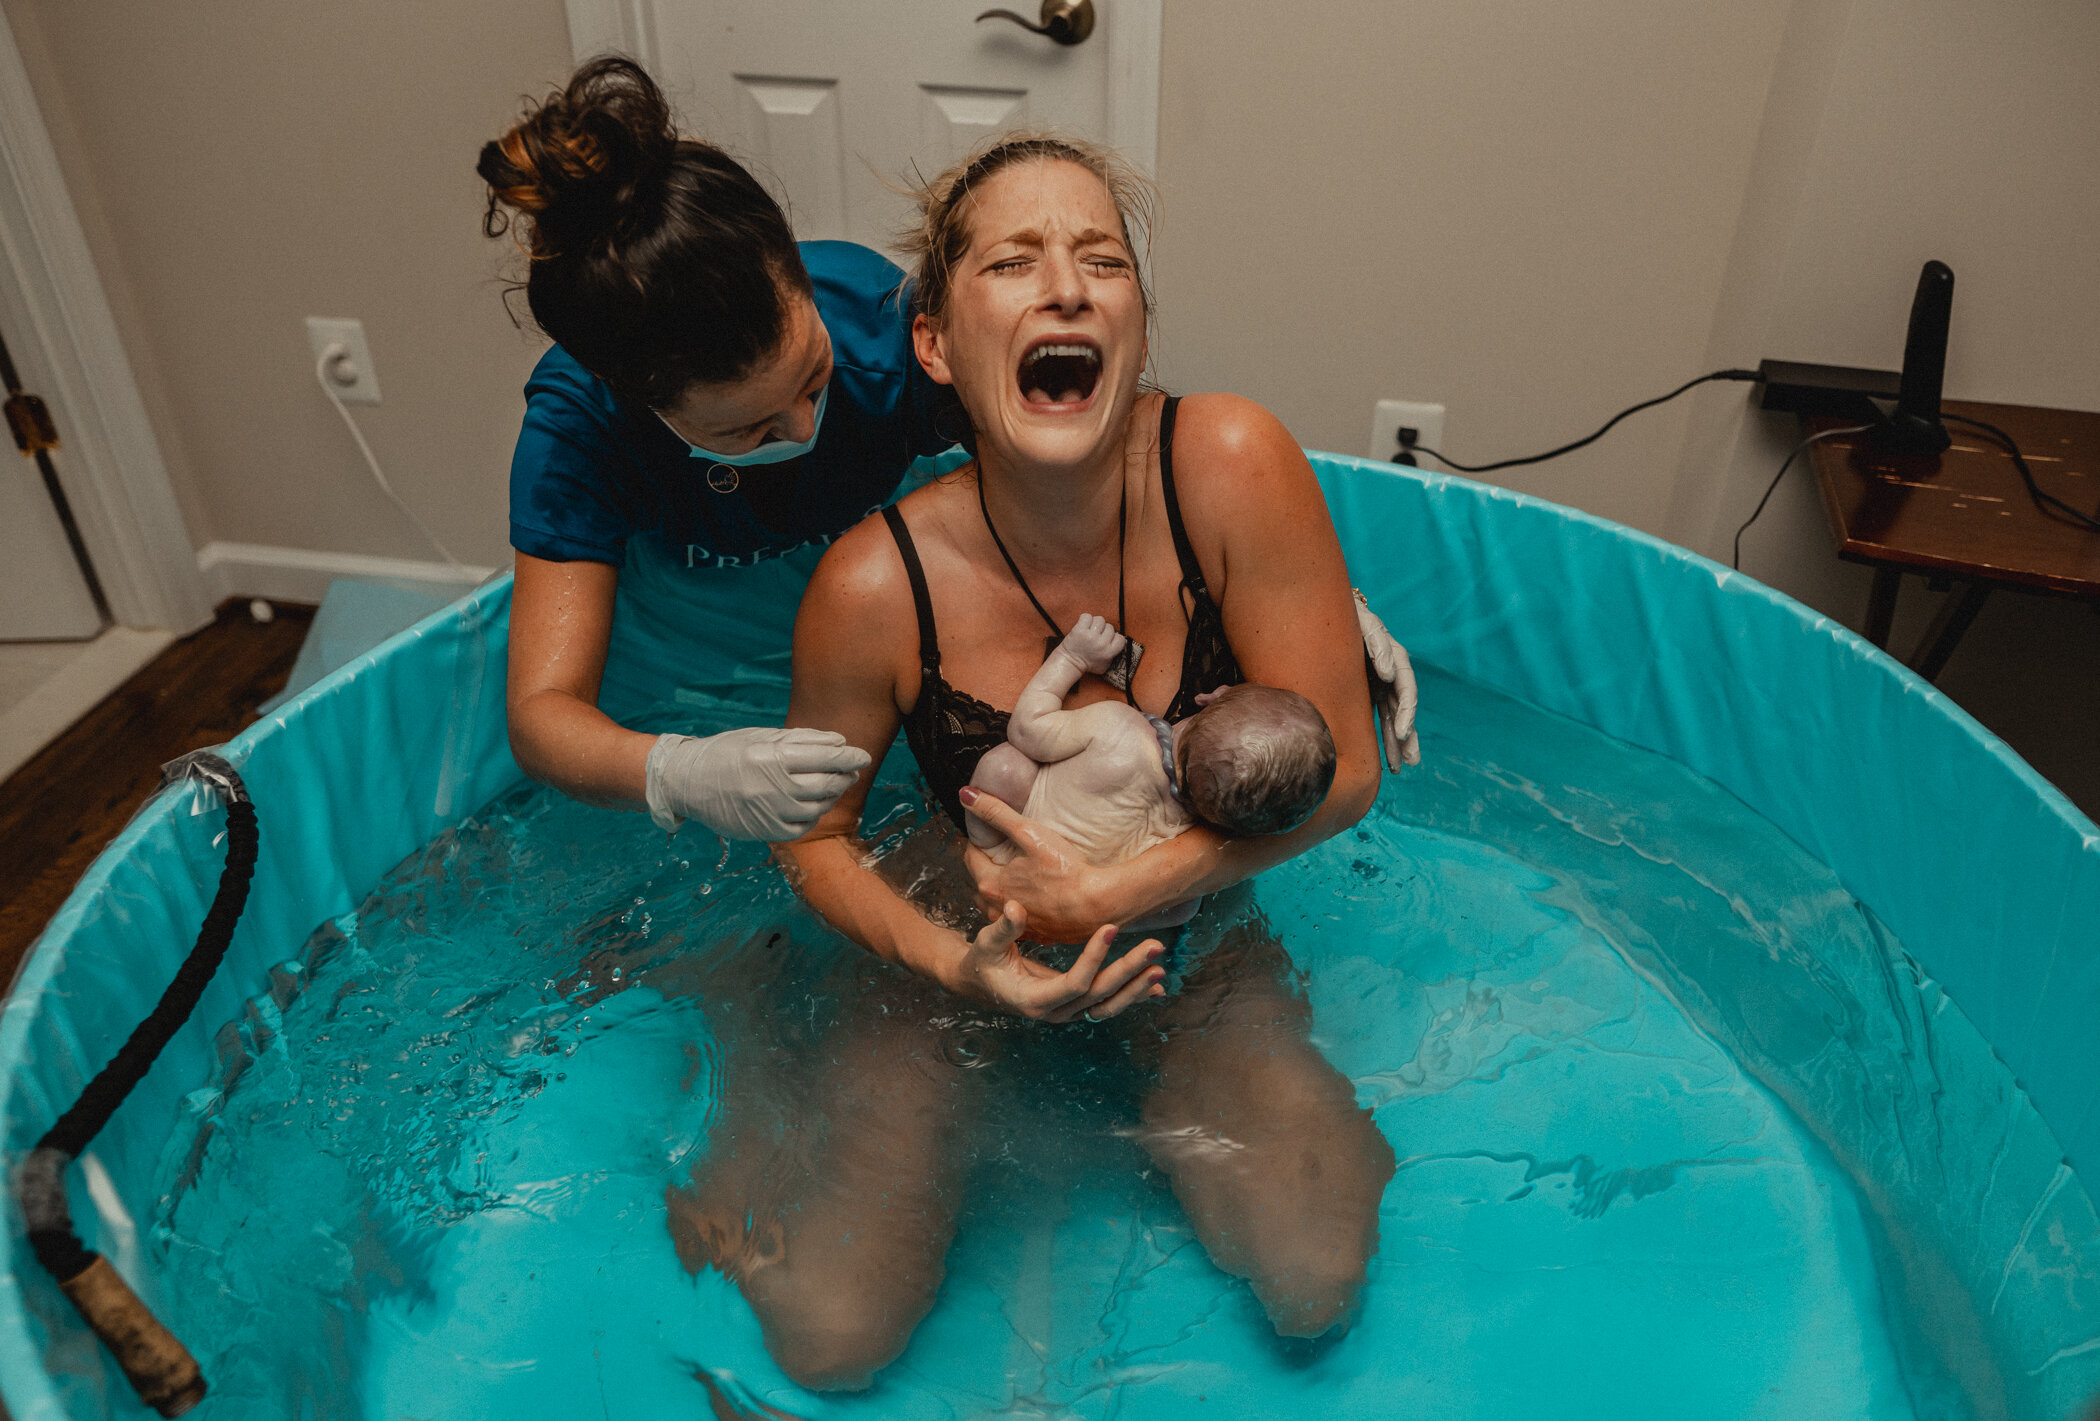 Woman has just birthed her baby in the birth tub during her Great Falls, VA home birth and let's out a big sigh of relief and joy while her baby is laying on her chest